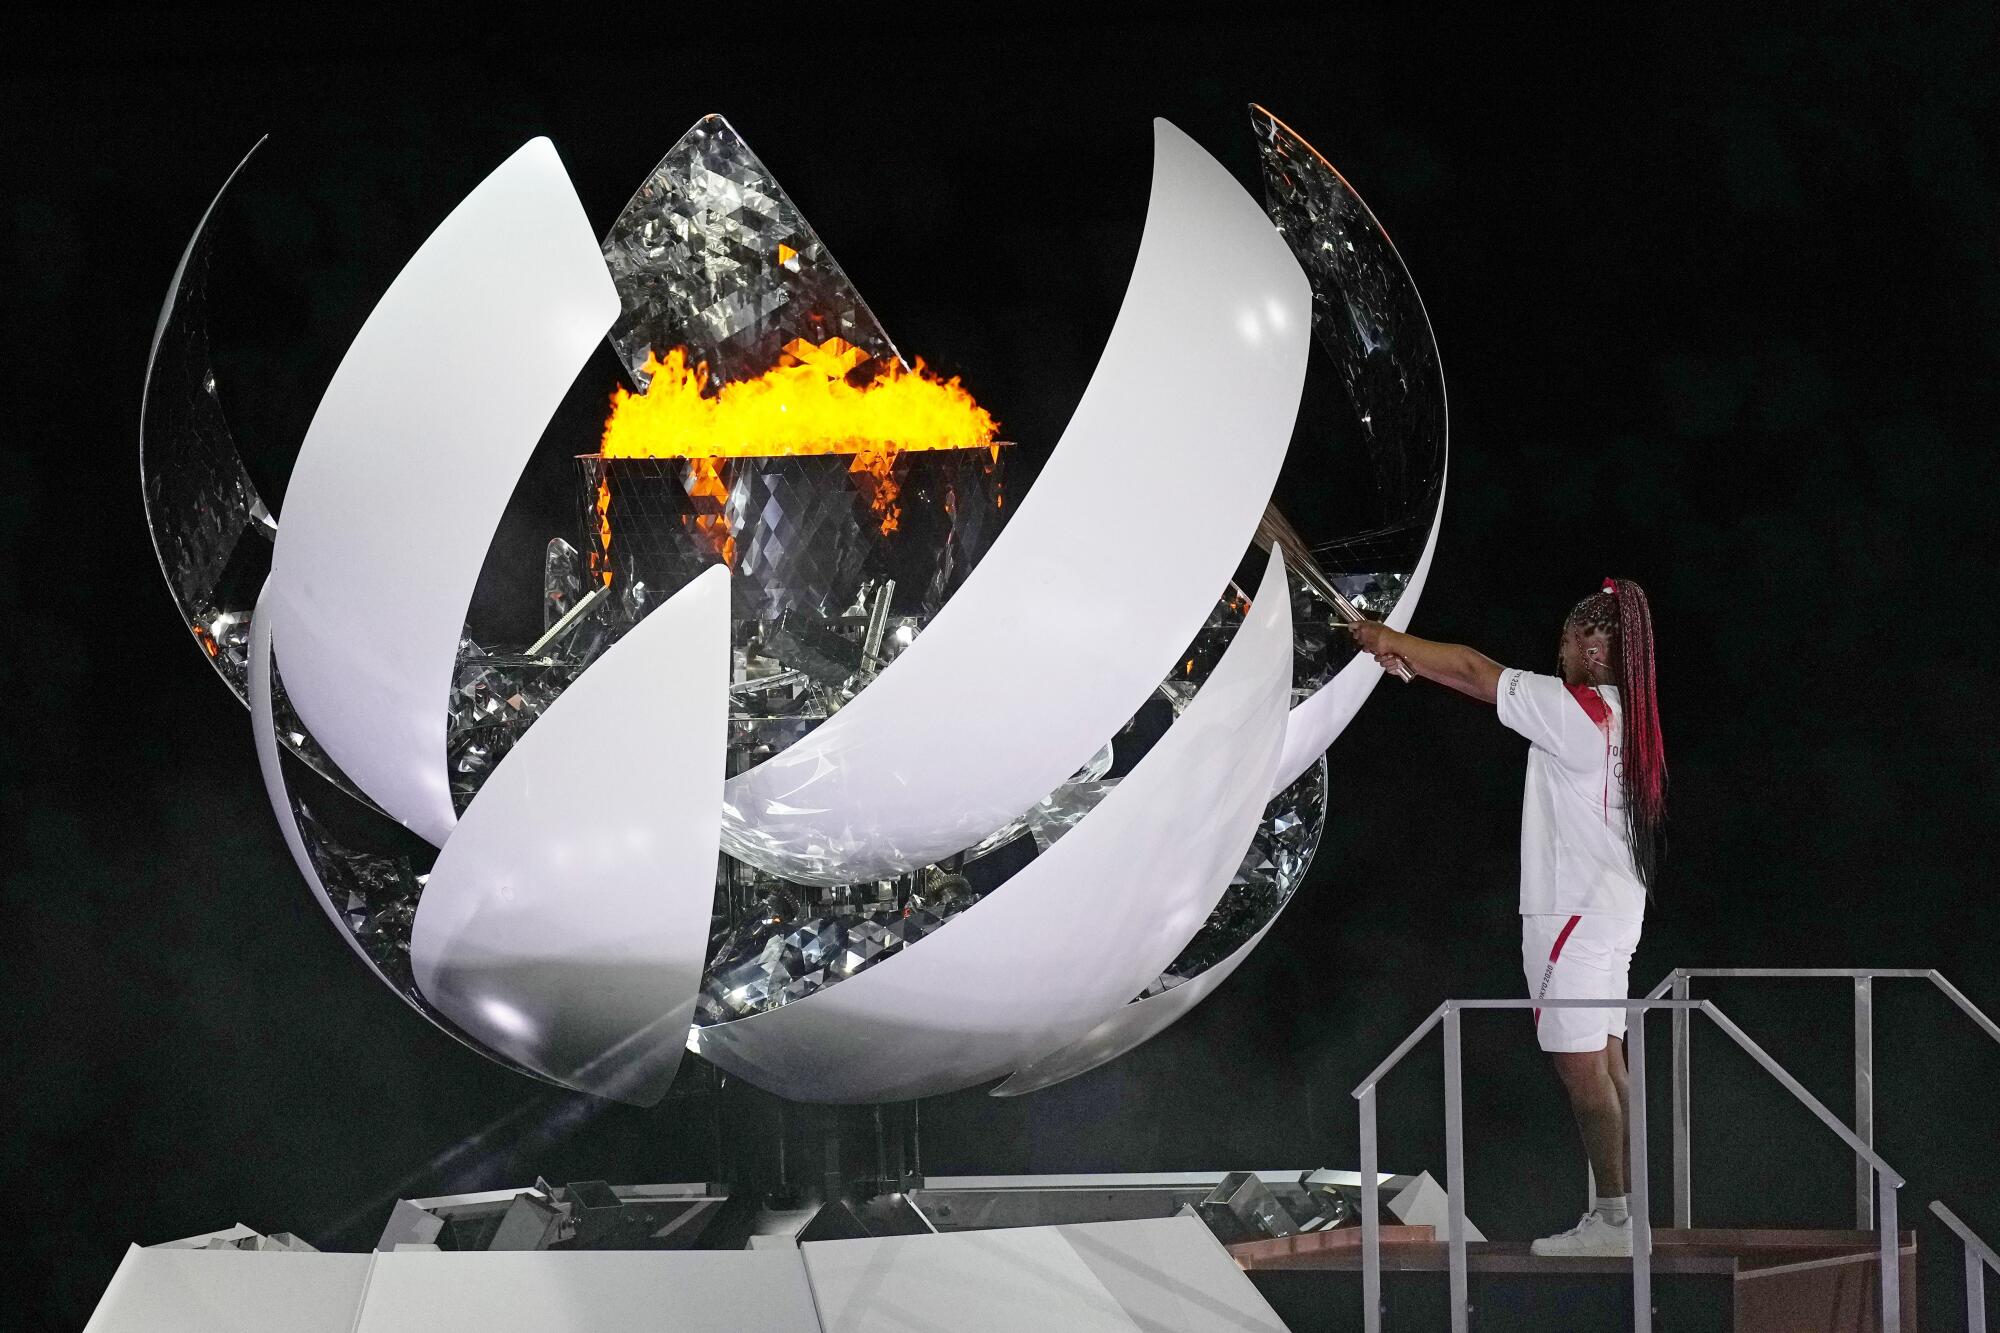 Naomi Osaka lights the Olympic flame during the opening ceremony in the Olympic Stadium.